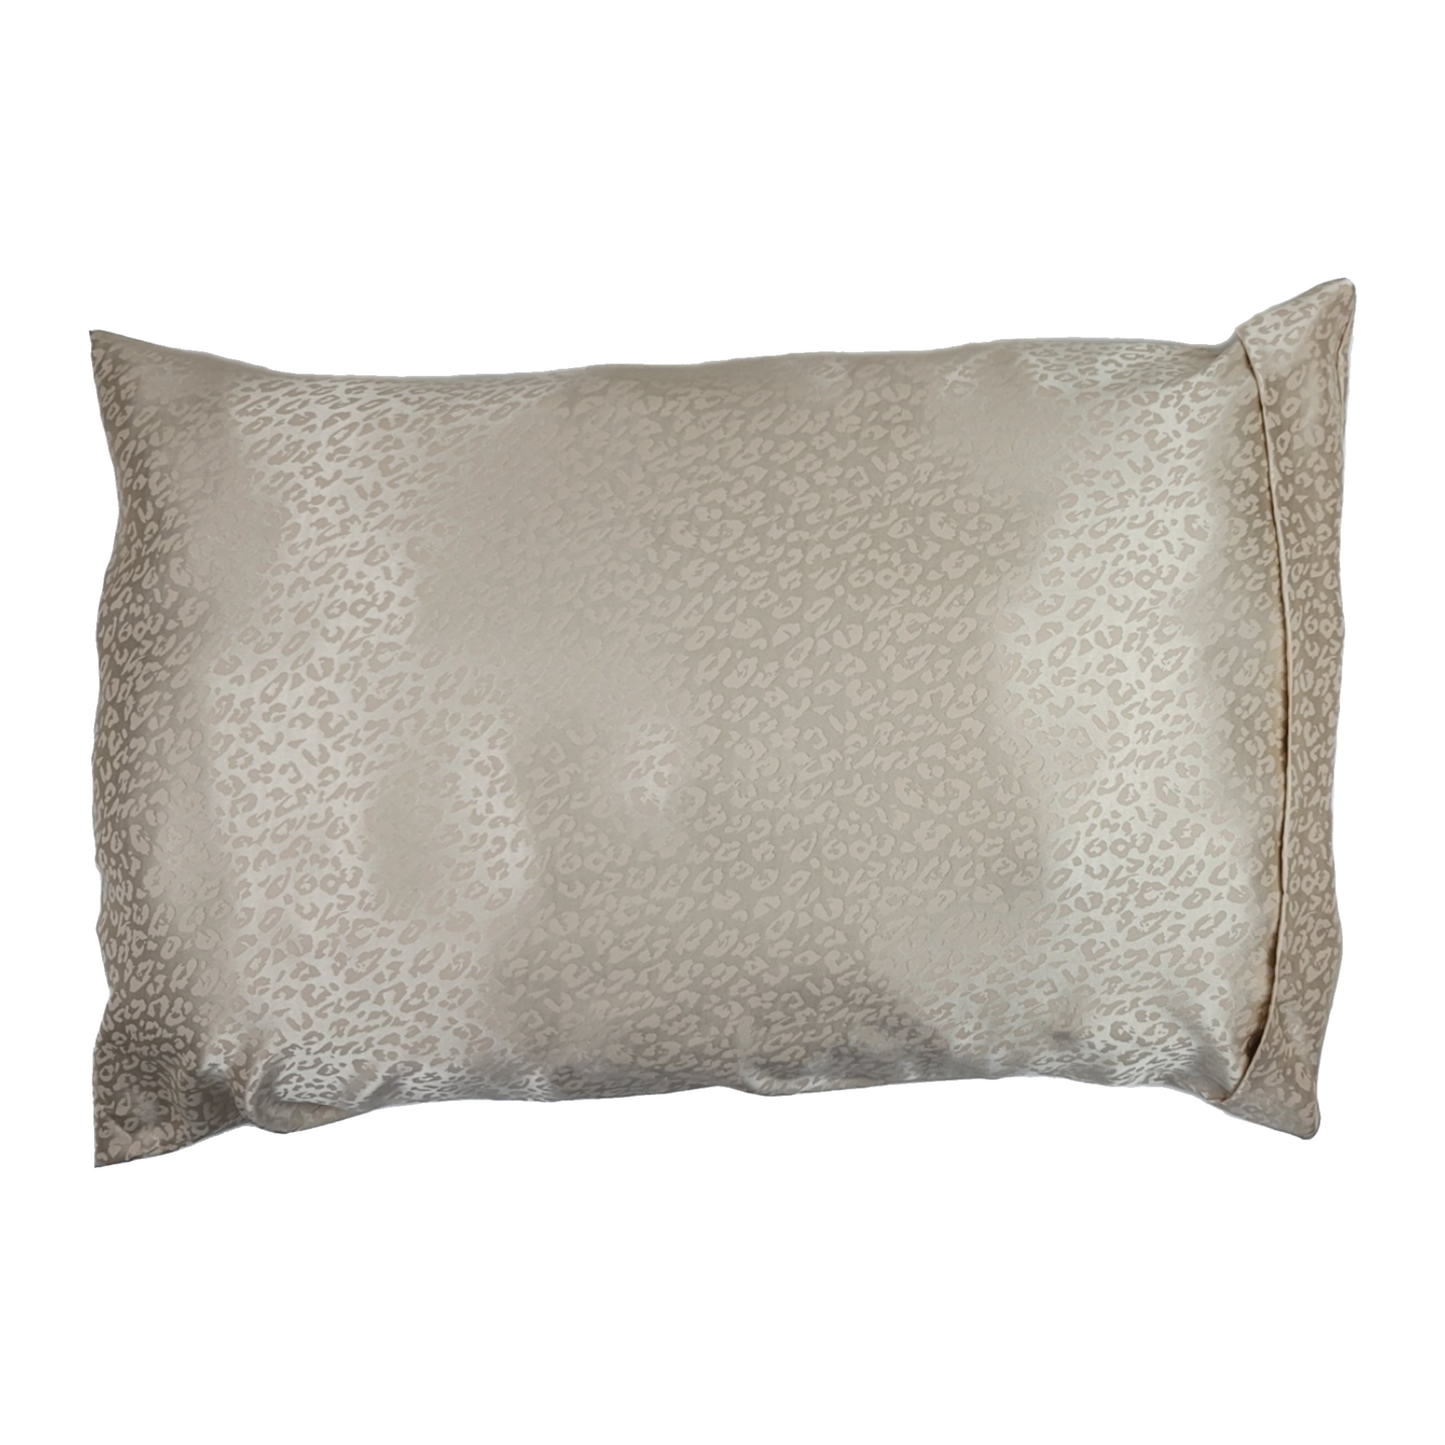 Luxe Satin Zippered Pillowcase - Taupe Jacquard Leopard Print